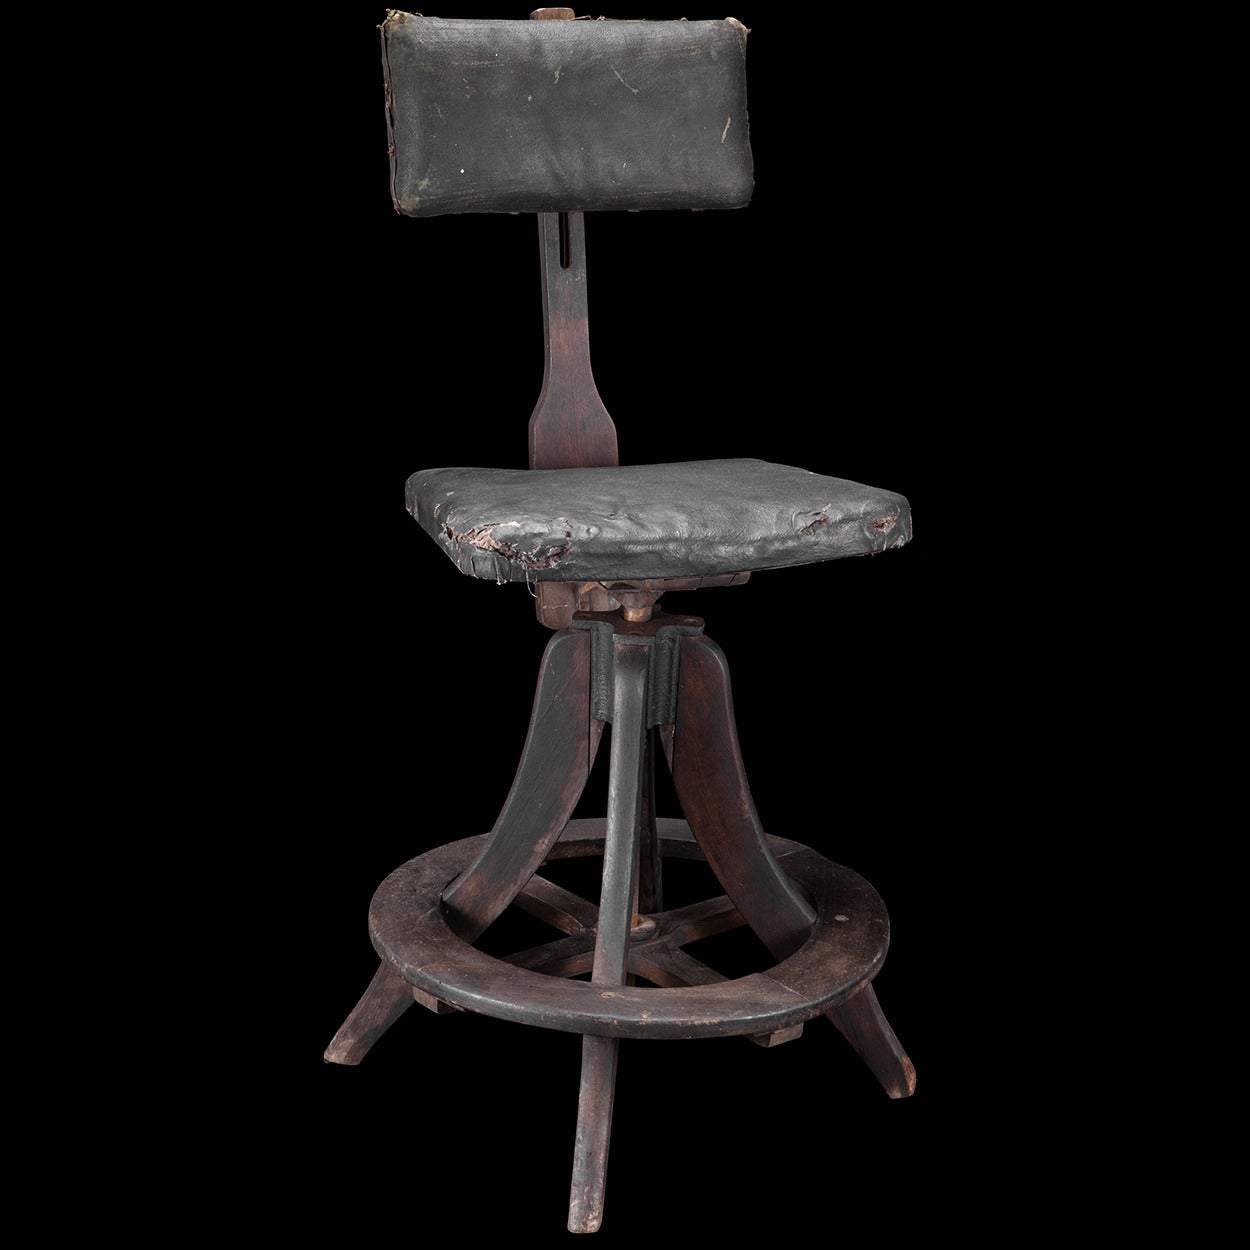 Early wooden swivel stool with adjustable height (22.5